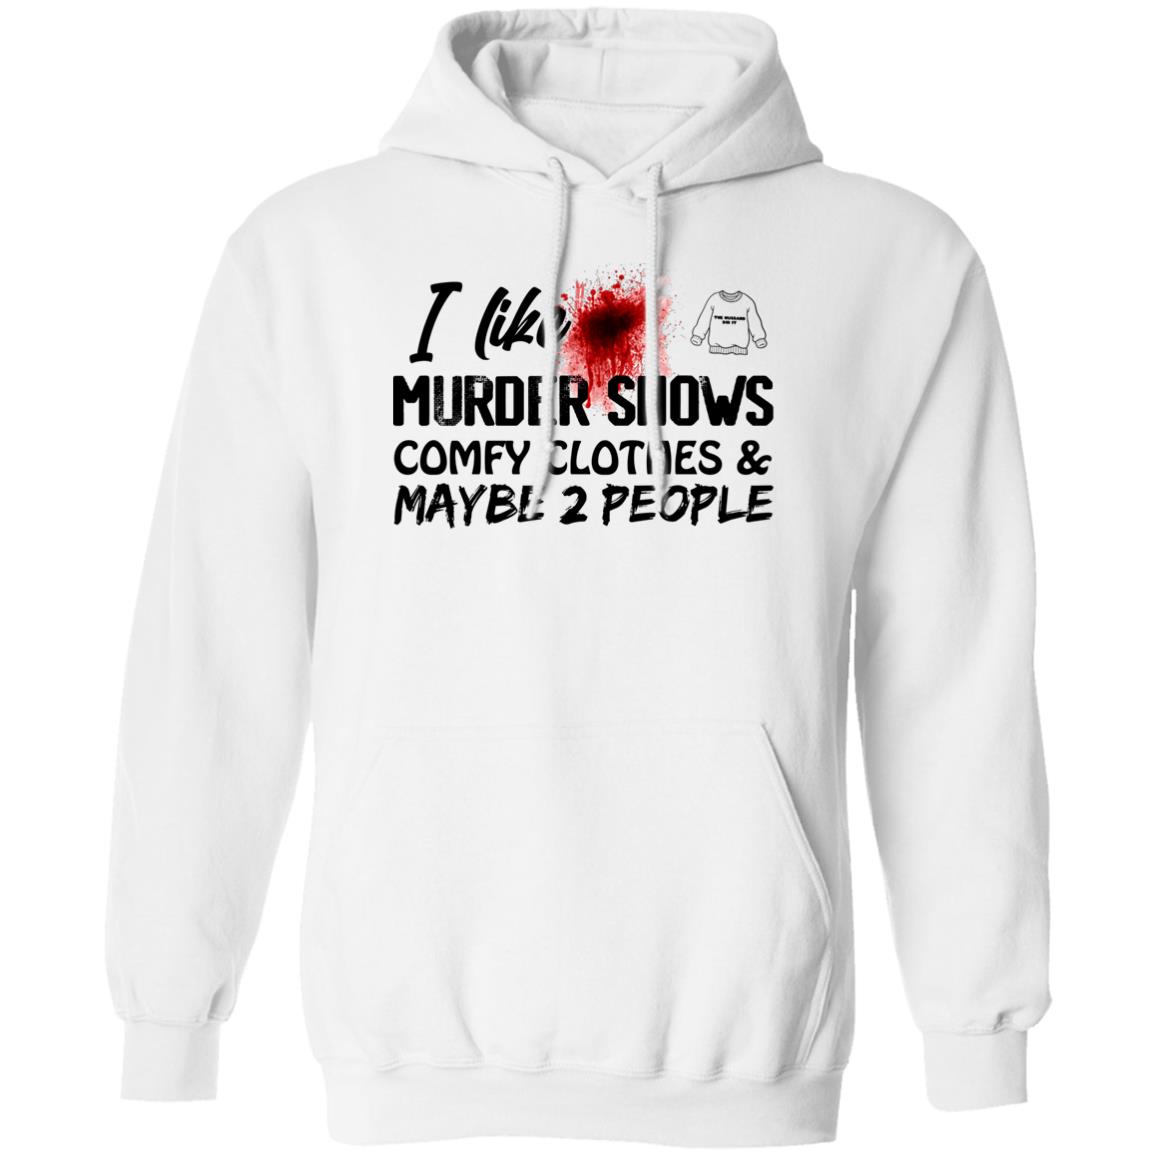 I Like Murder Shows Comfy Clothes And Maybe 2 People Shirt 1